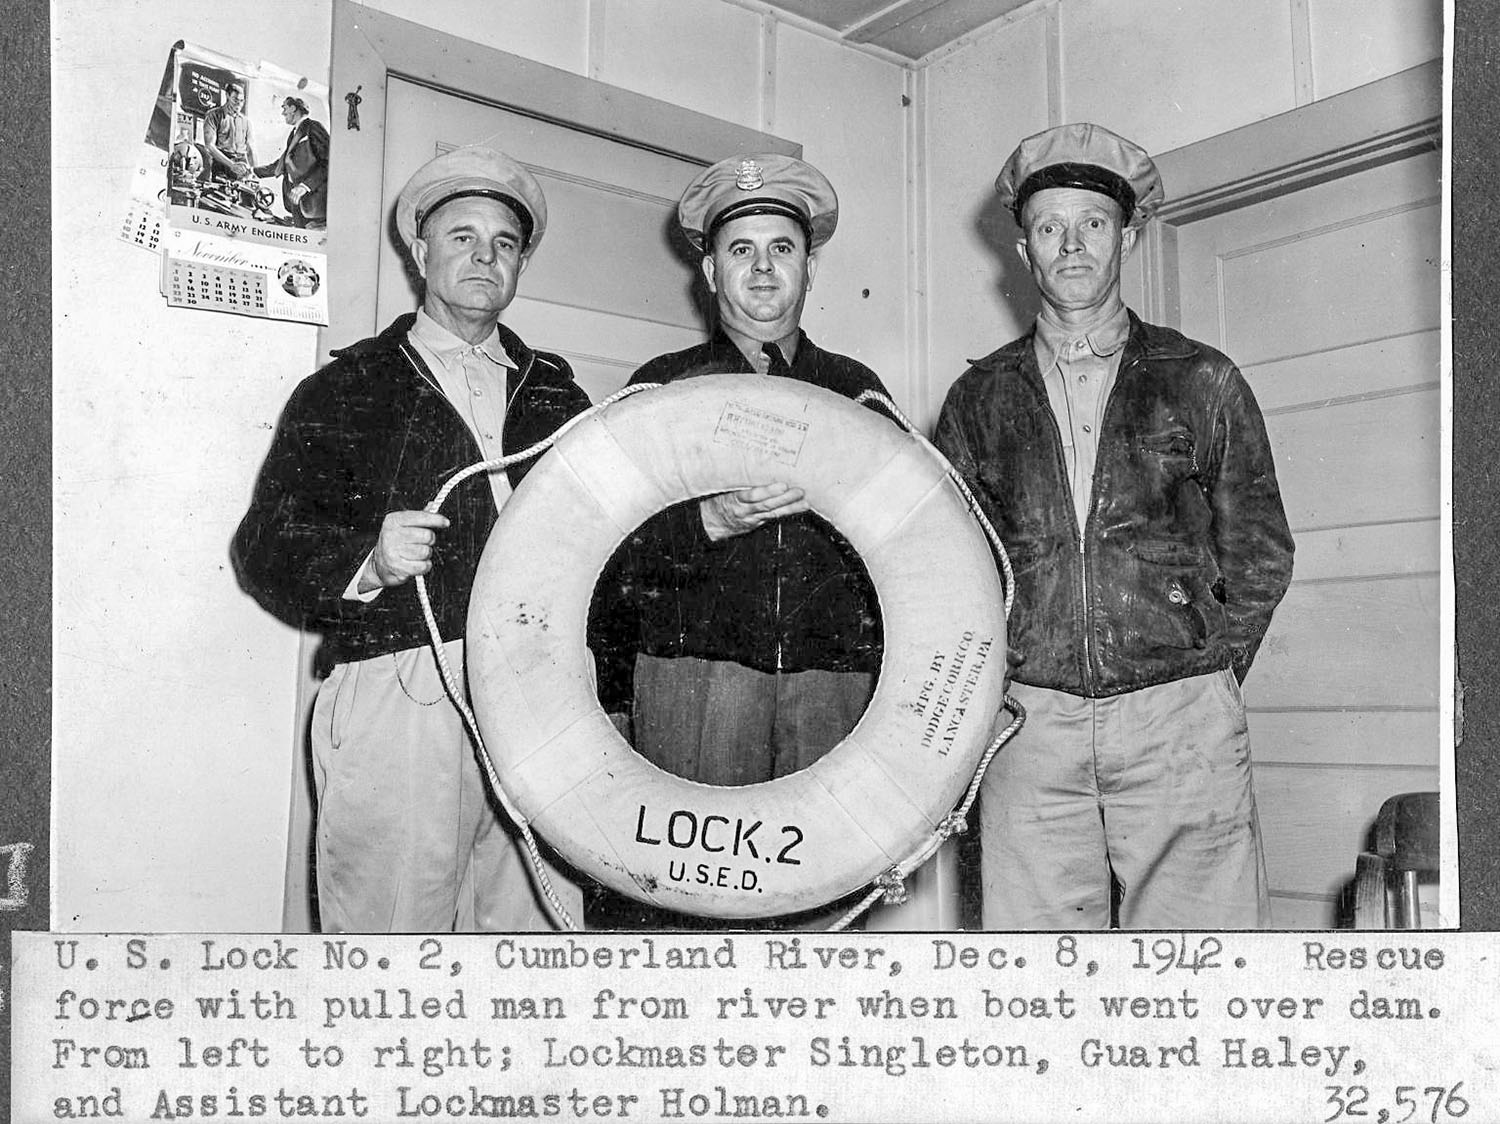 From left, Lockmaster Singleton, Guard Haley and Assistant Lockmaster Red Holman of the Nashville Engineer District pose after rescuing a man when his boat went over Dam 2 on the Cumberland River in Nashville, Tenn., December 8, 1942. (Nashville Engineer District historic photo)